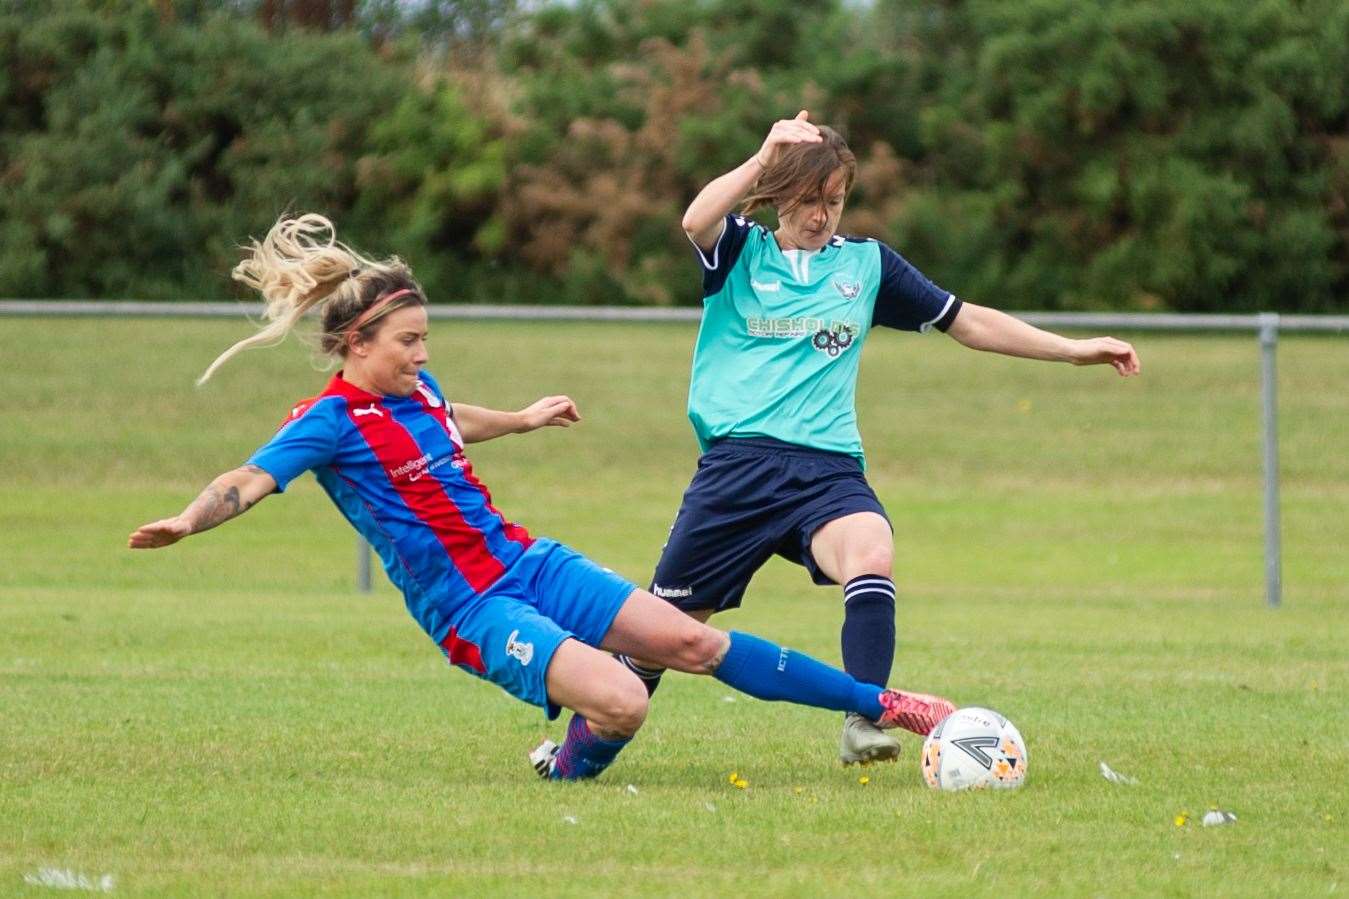 Inverness Caledonian Thistle's Amy Lee Davidson slides in for a challenge on Buckie Ladies' Gemma Geddes. Picture Daniel Forsyth.